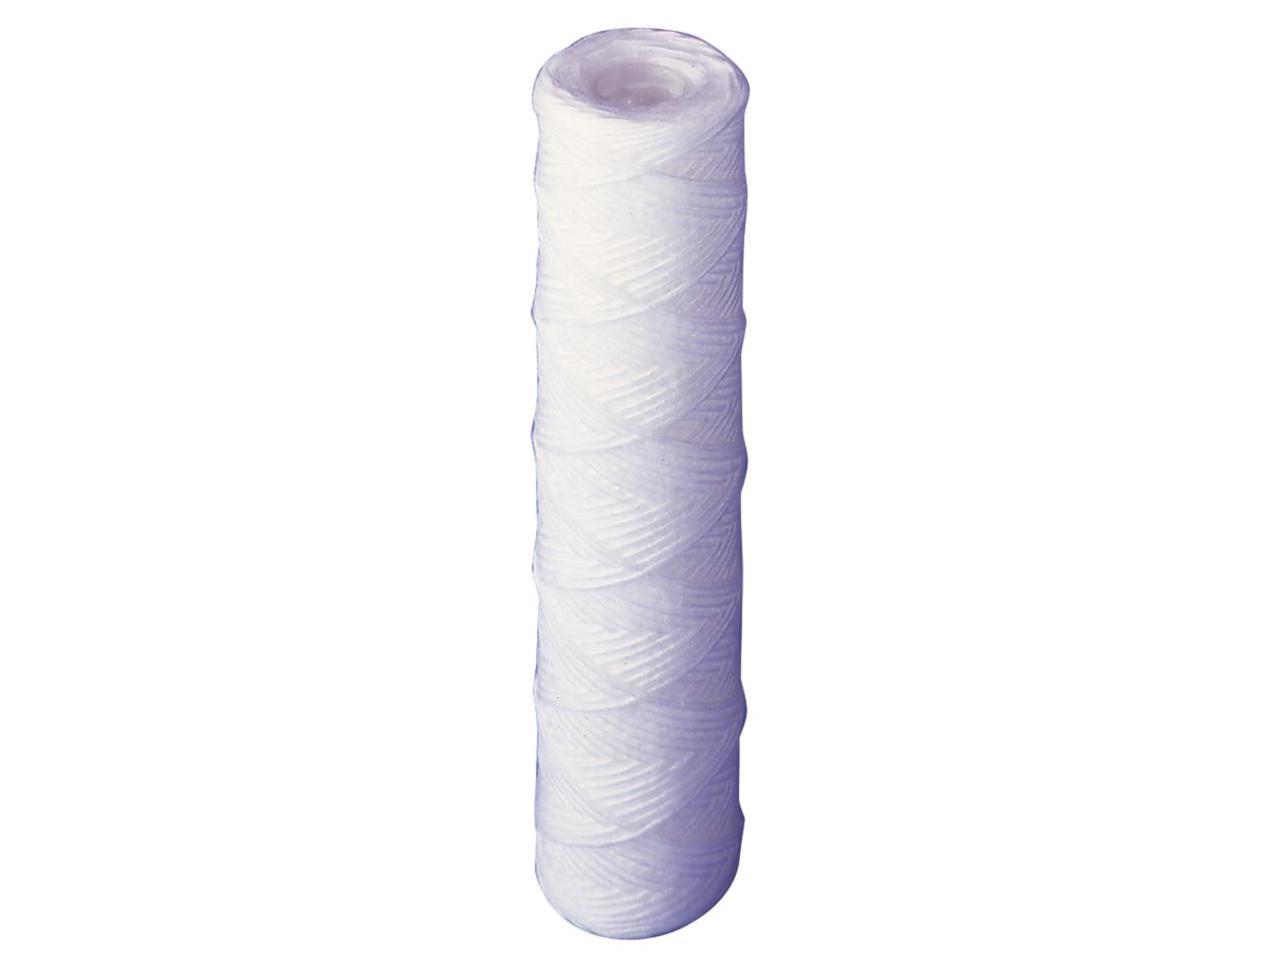 Campbell SED-S5 Water Filter Cartridge